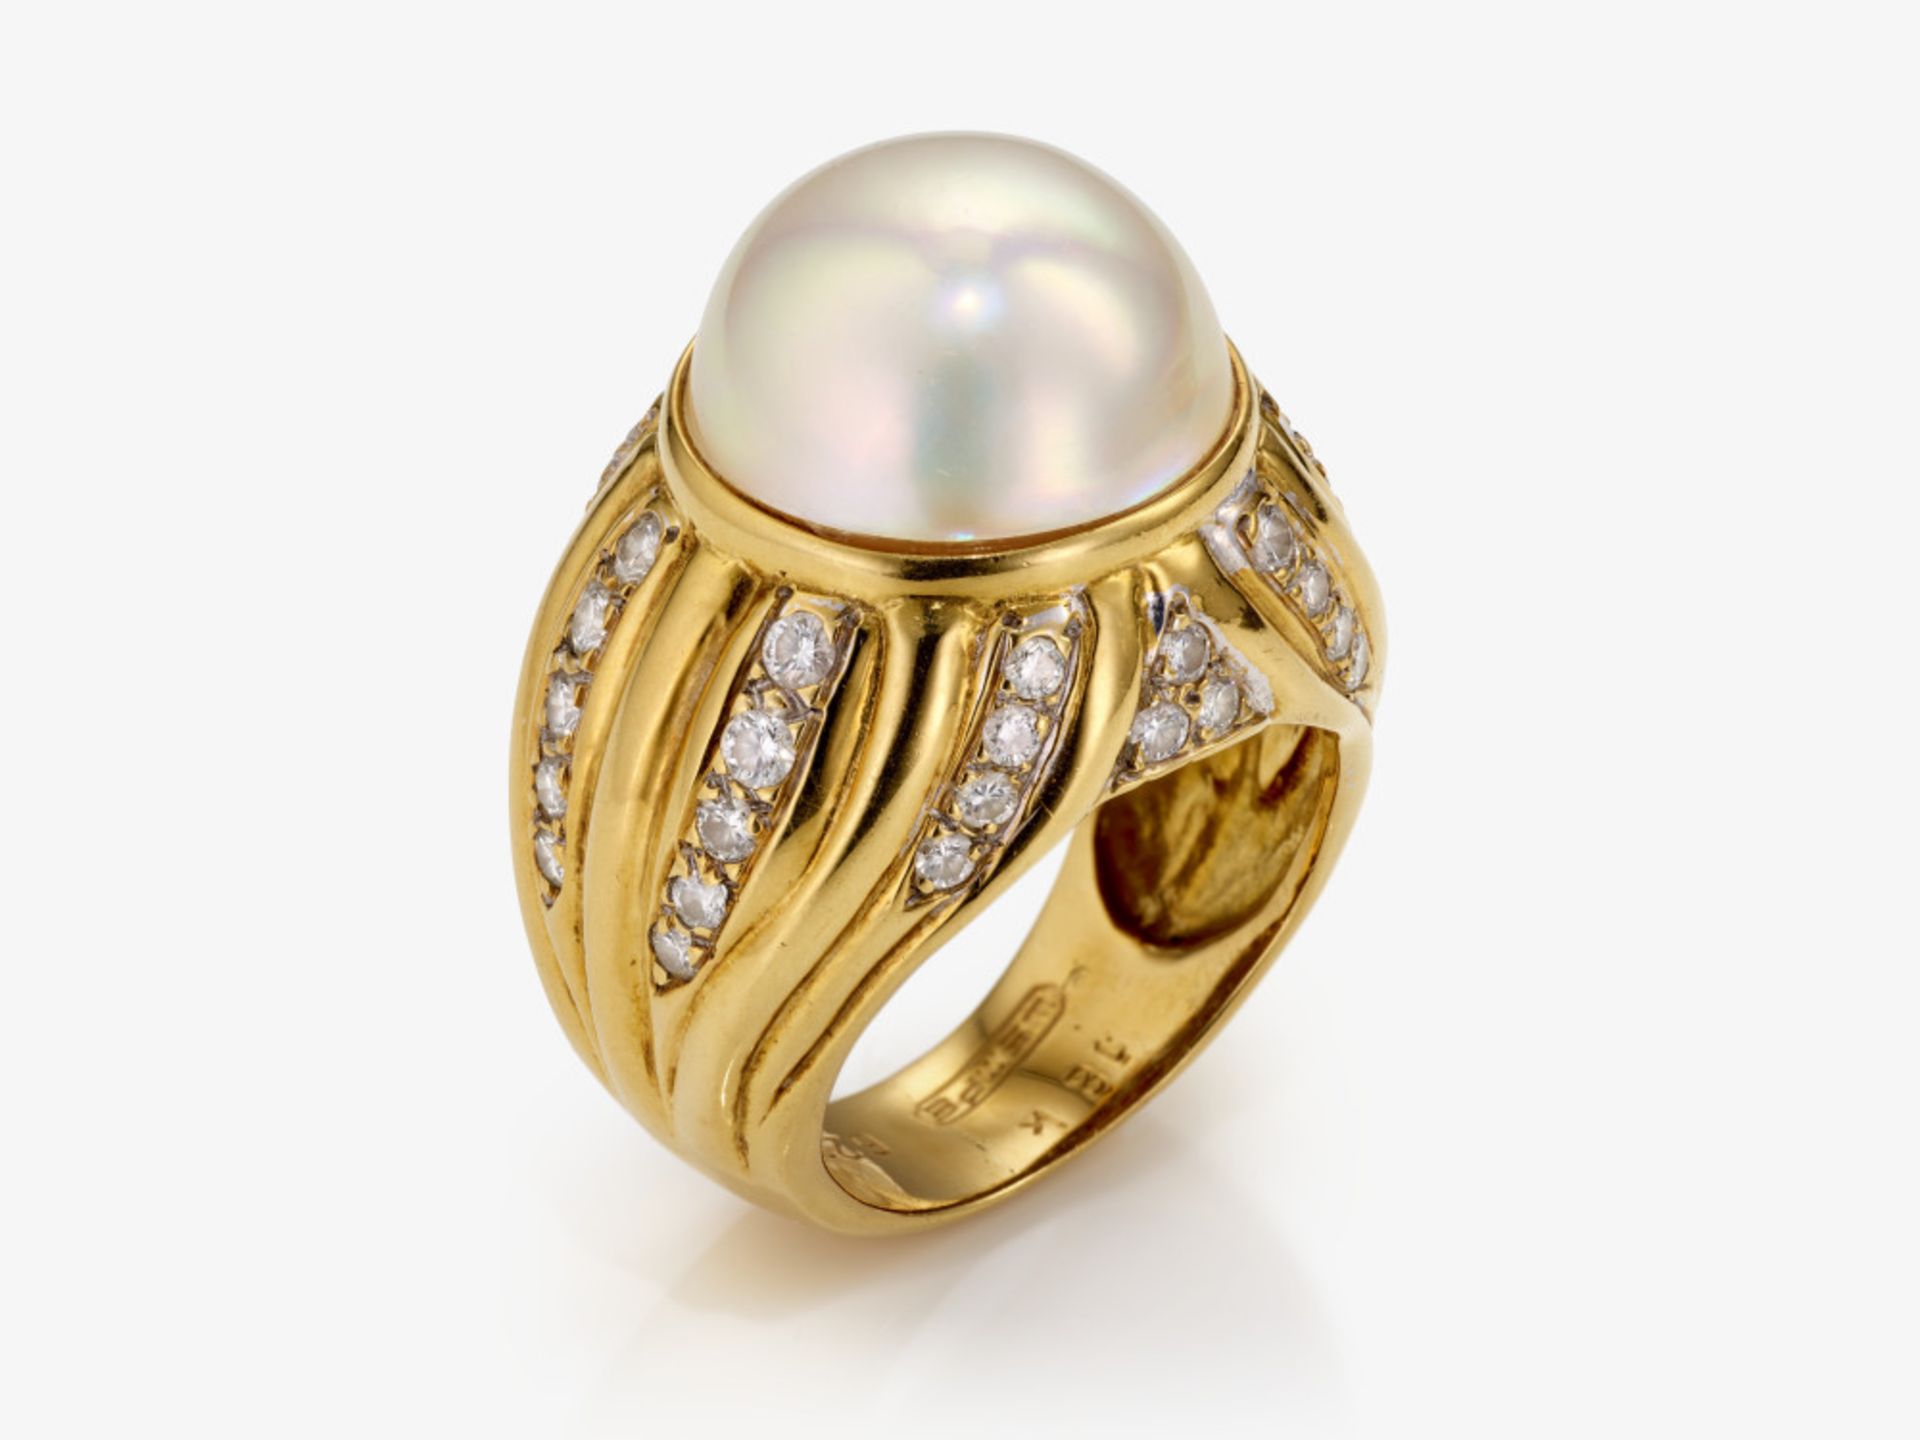 A ring with a South Sea cultured pearl and brilliant-cut diamonds - Germany, WEMPE